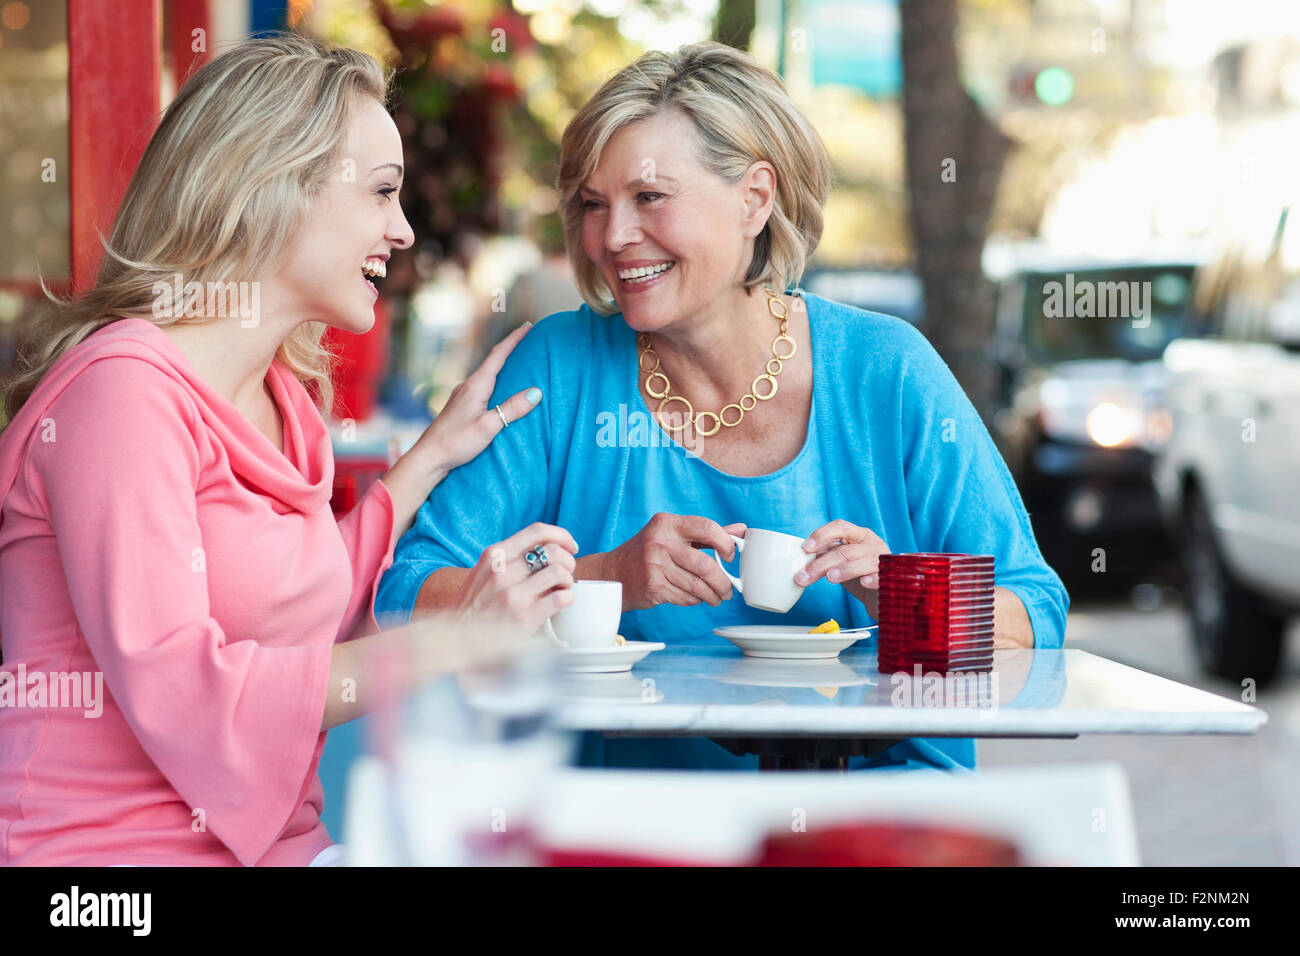 Caucasian mother and daughter drinking coffee at sidewalk cafe Stock Photo